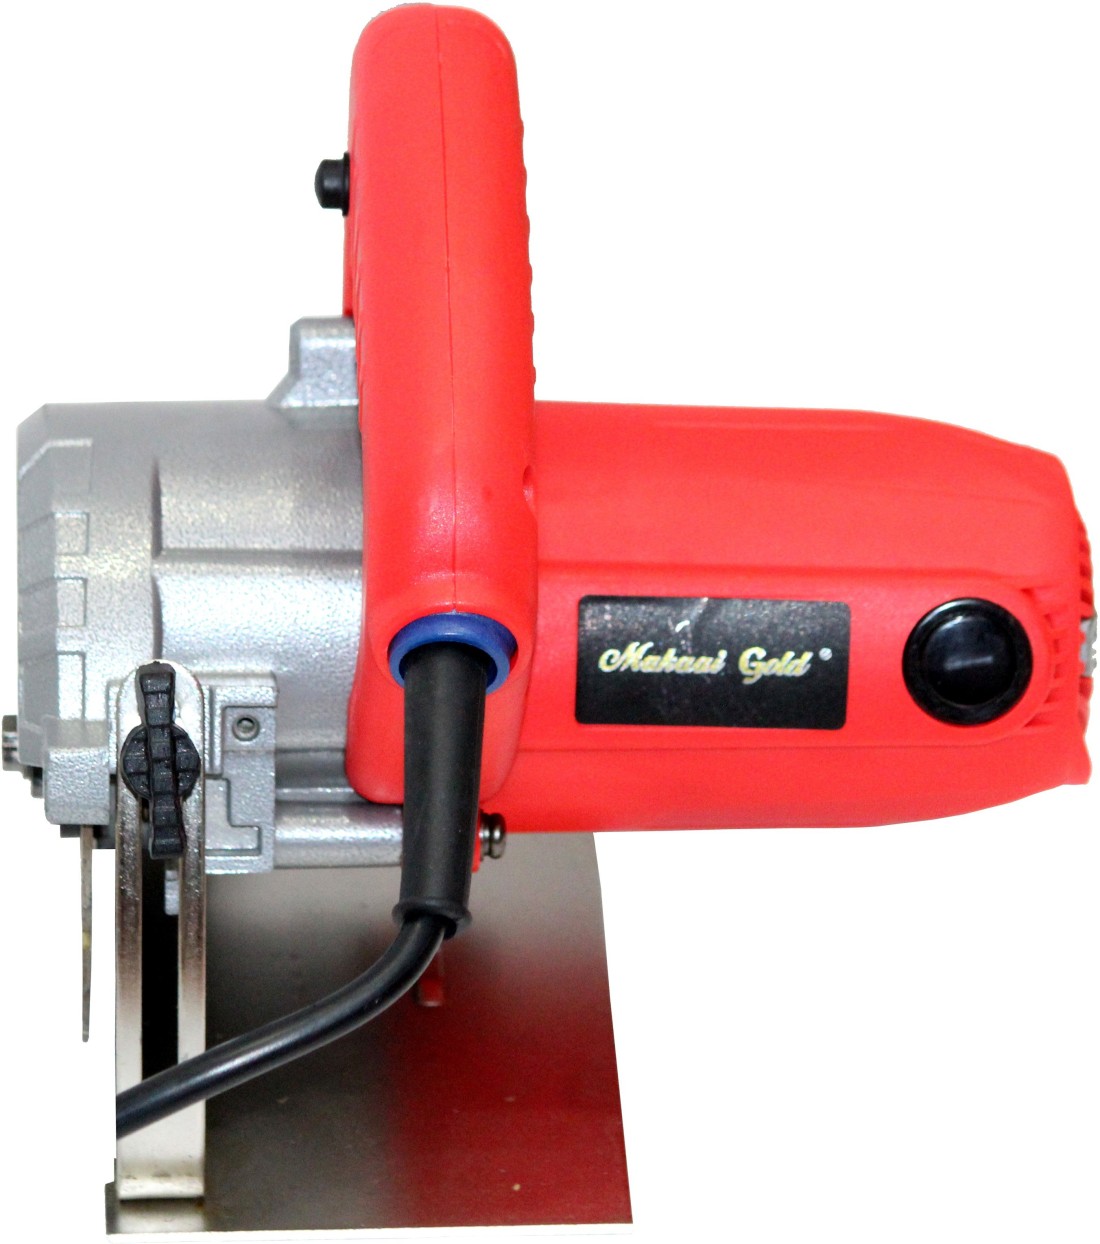 SAIFPRO Heavy Duty Marble/wood Cutter Machine Handheld Tile Cutter Price in  India - Buy SAIFPRO Heavy Duty Marble/wood Cutter Machine Handheld Tile  Cutter online at